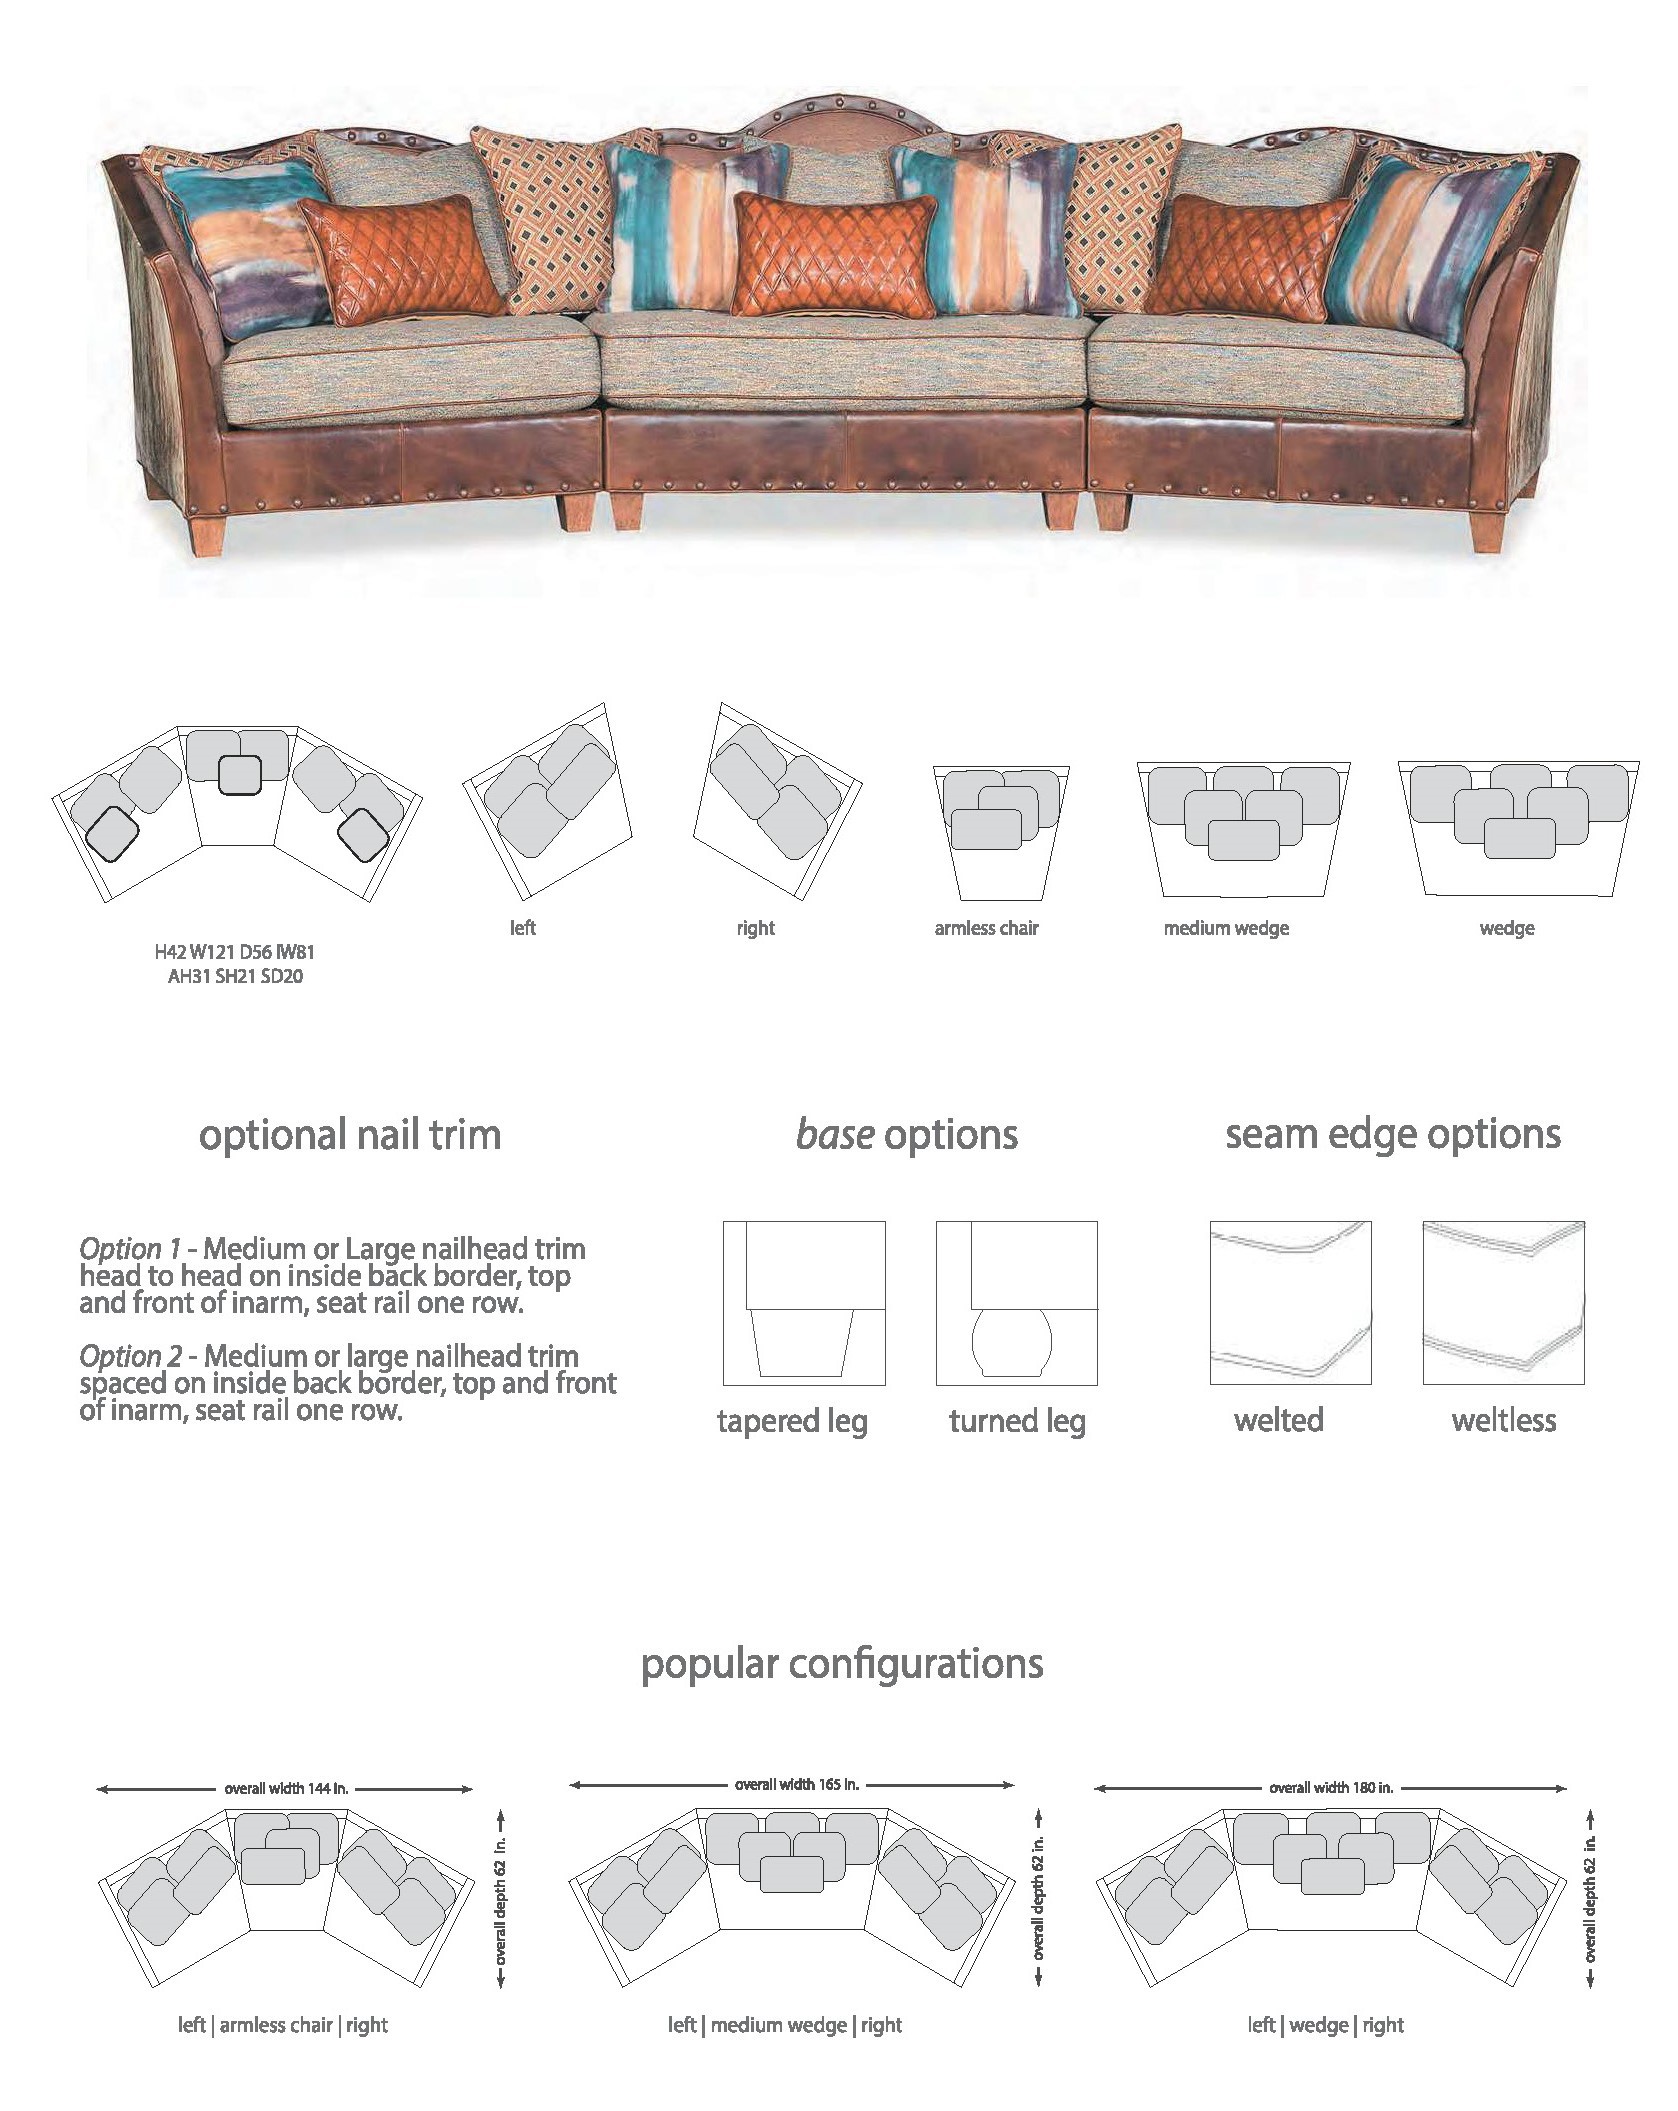 SECTIONALS - Leather & High End Upholstered Furniture Sectional sofa custom configurations